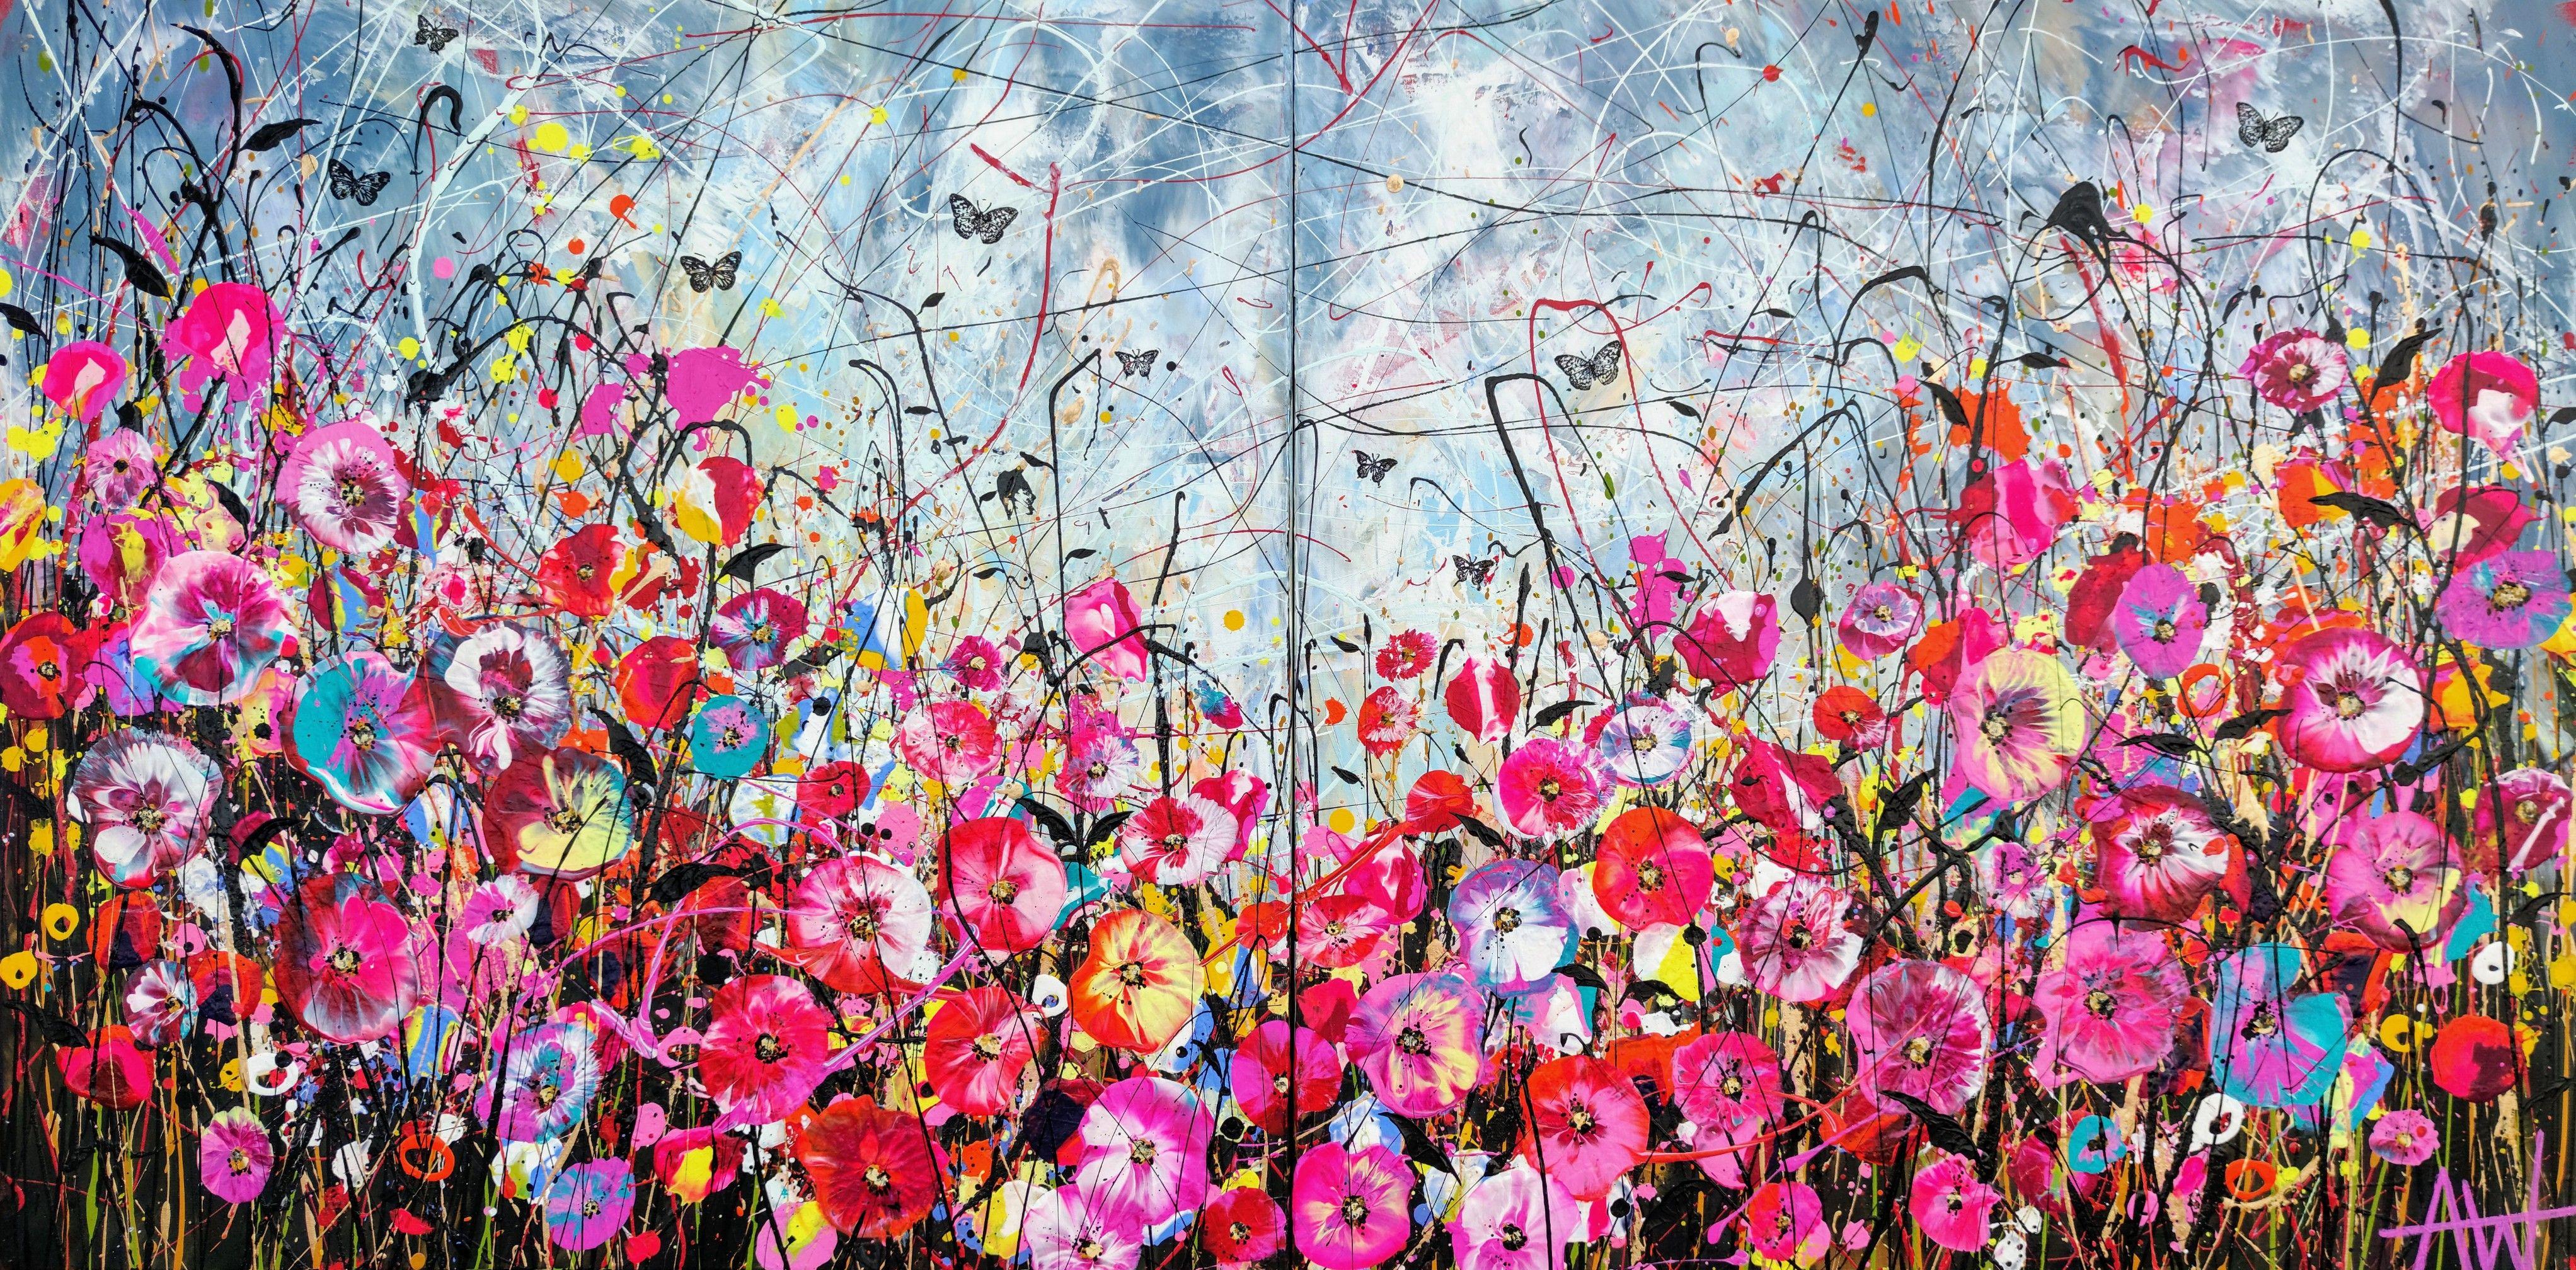 Scattered Rainbows, acrylic and enamel on canvas, 160 x 80 x 2 cm on two panels each measuring 80 x 80 x 2 cm (Diptych) Scattered Rainbows, a poem in pink. After the rain the flowers will bloom and though I thought the sun would never shine again